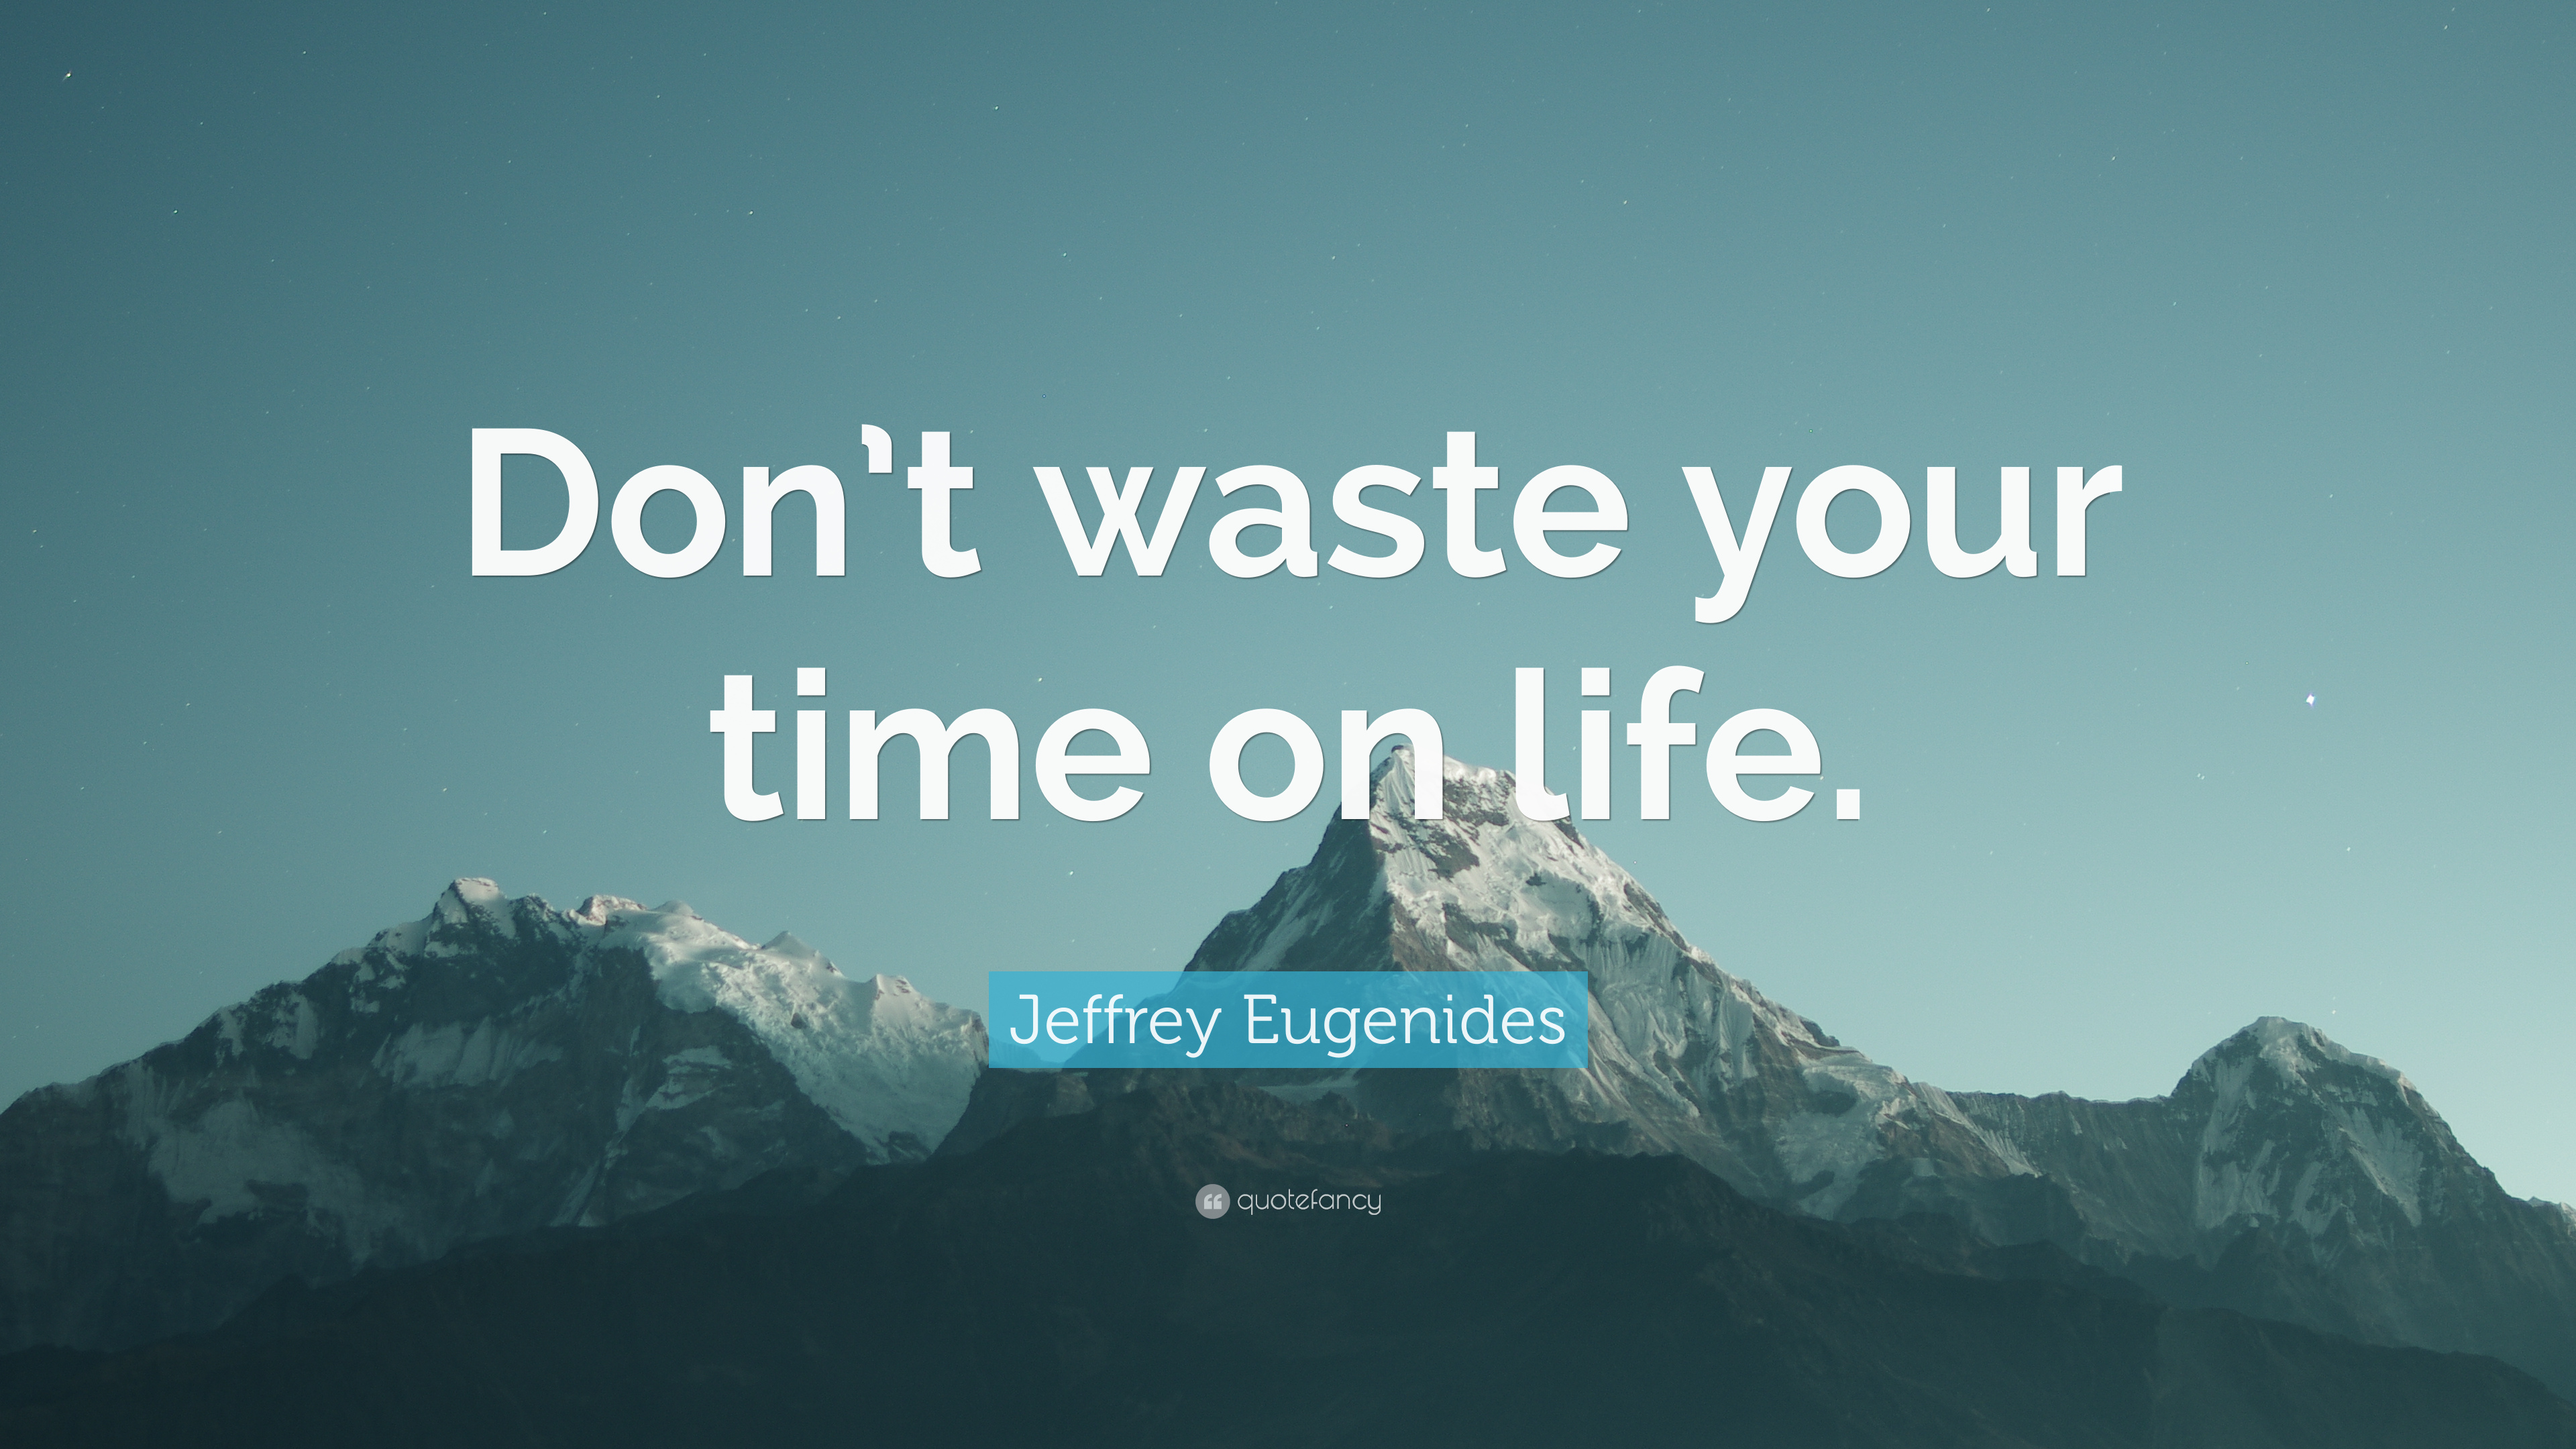 Jeffrey Eugenides Quote: “Don't waste your time on life.”